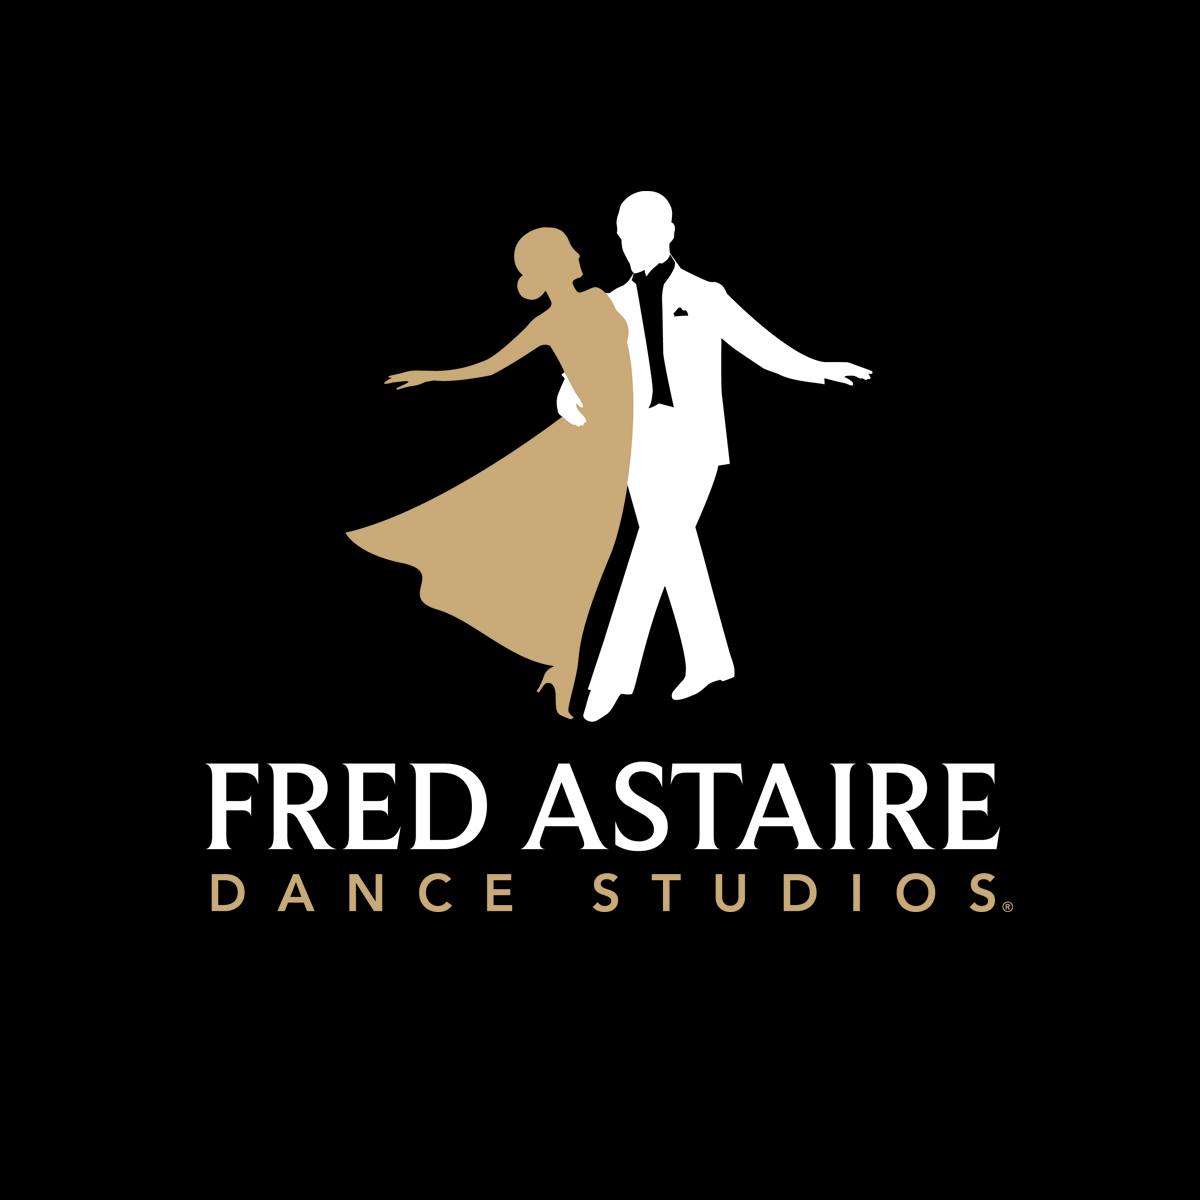 Fred Astaire Dance Studios Logo